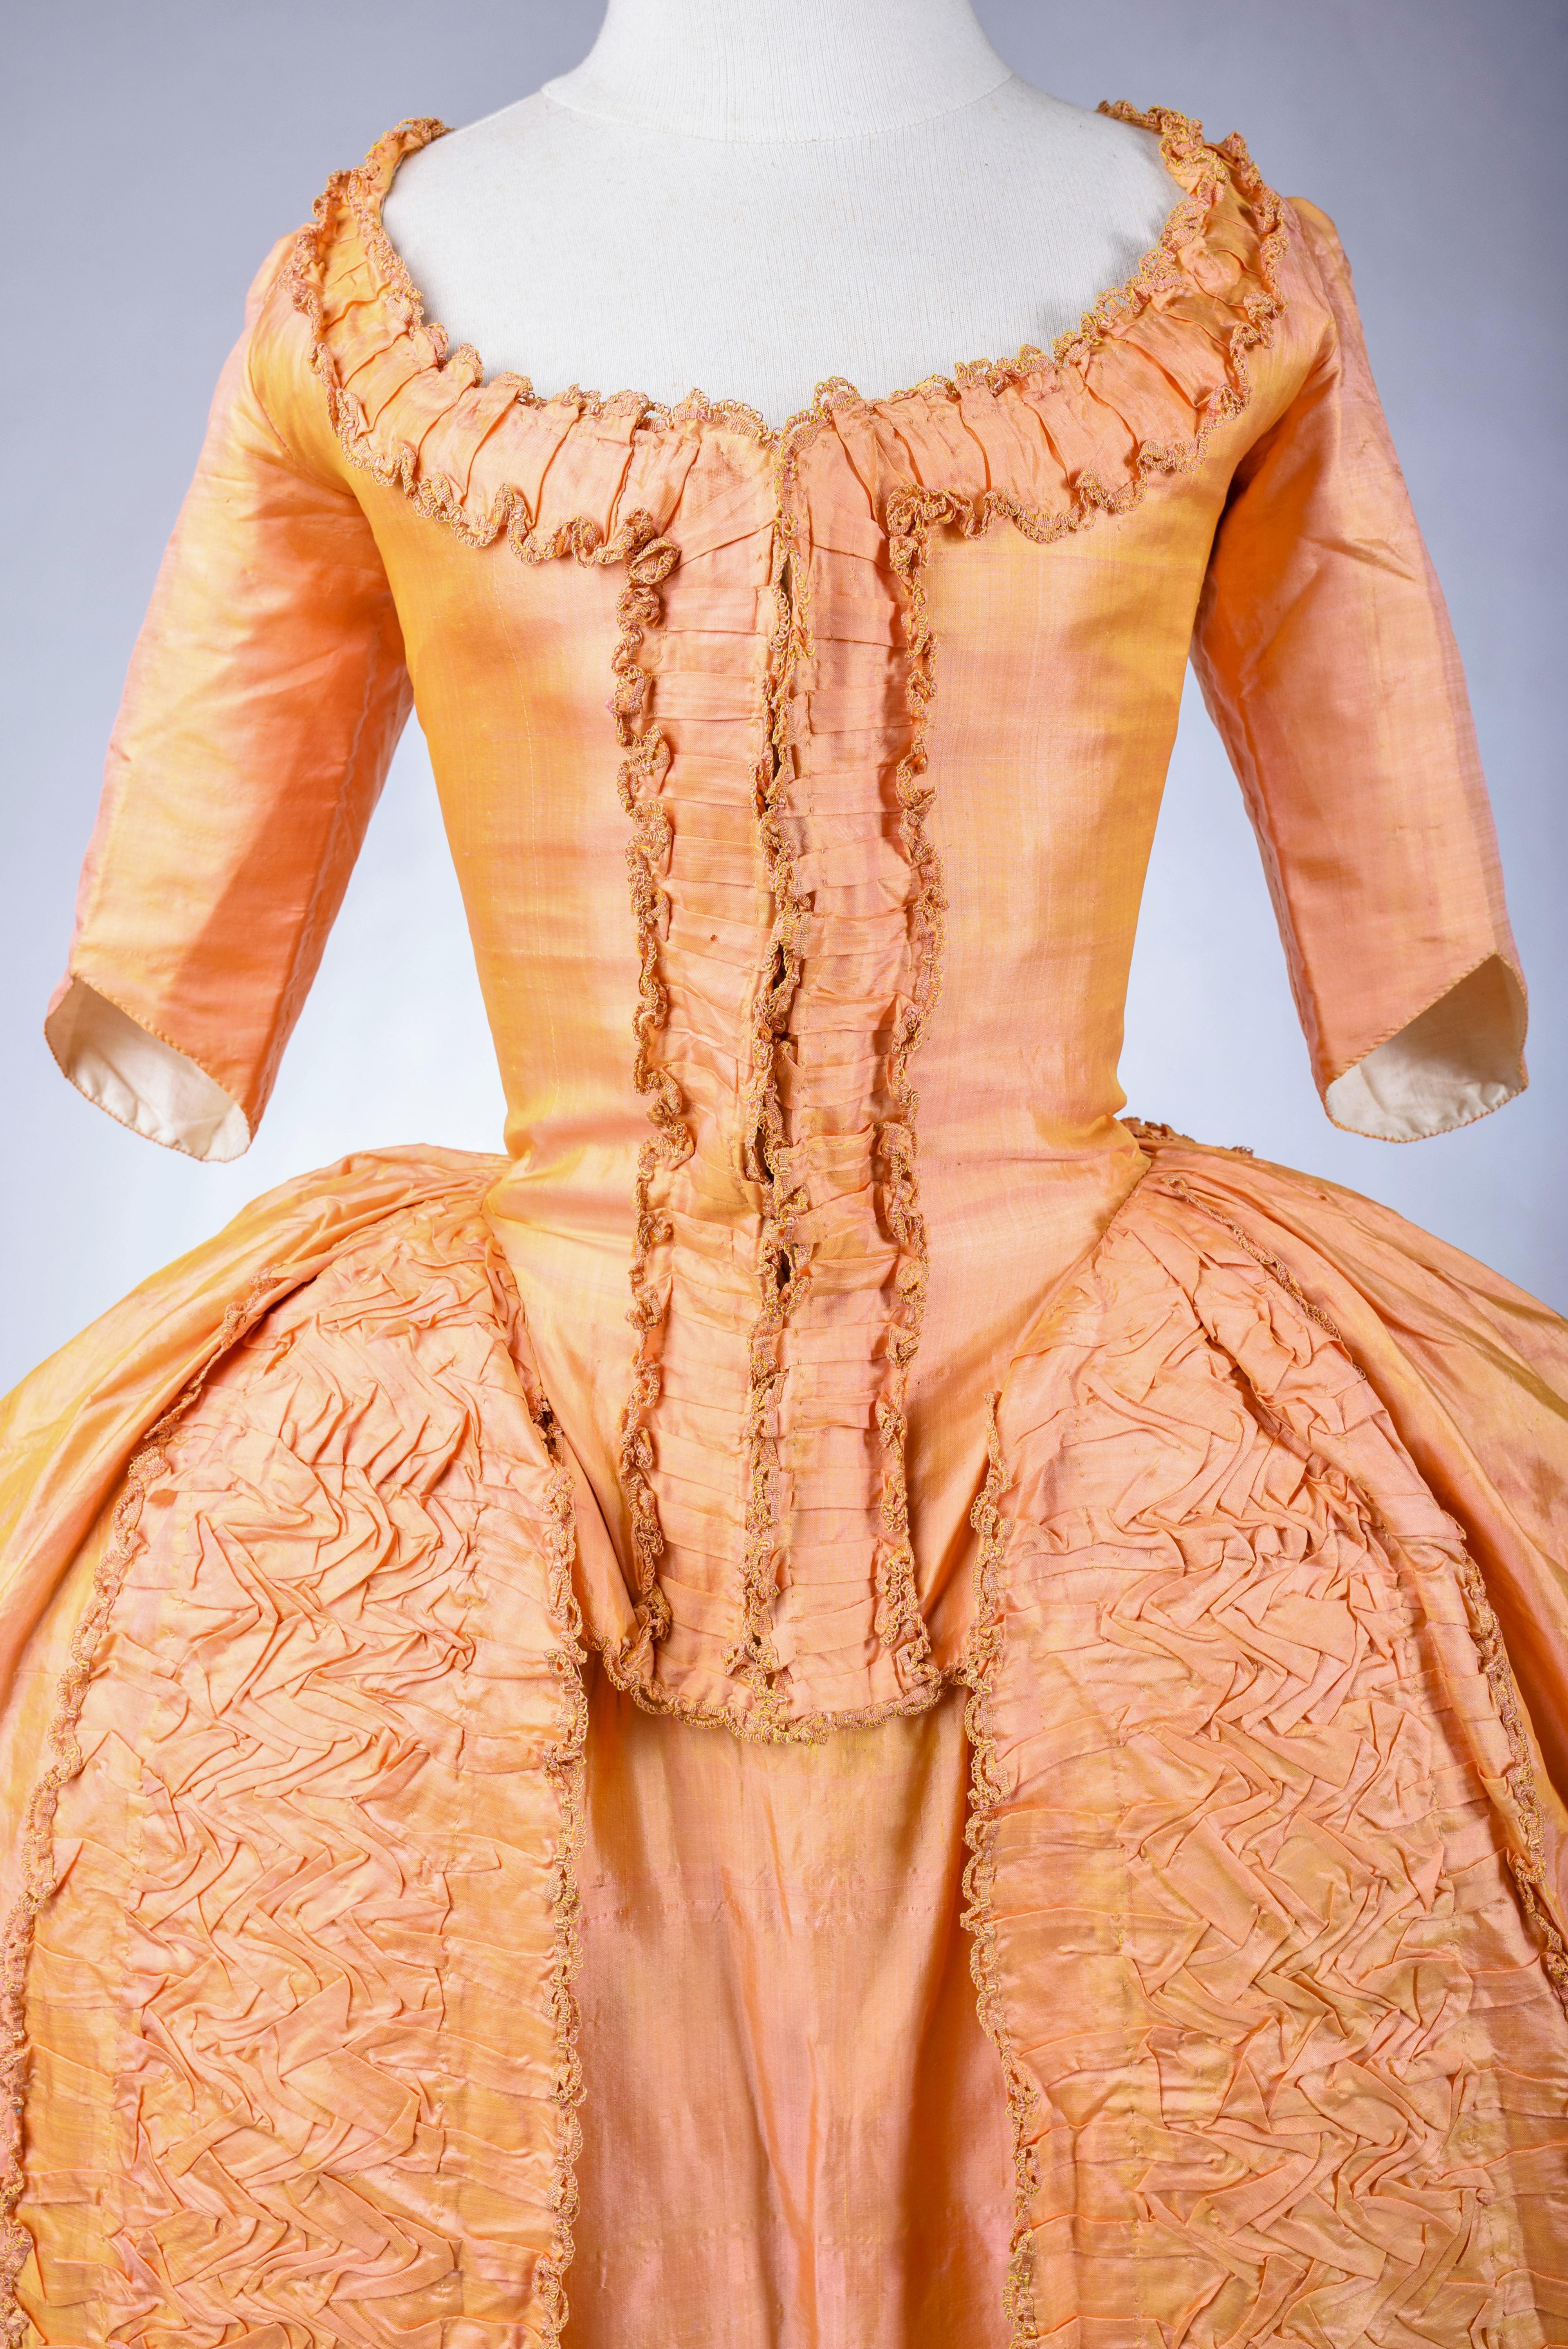 Circa 1785
France
A sack back gown, coat and skirt in salmon and yellow changing taffeta Florence silk. The gown has an à l’anglaise whalebone laced front bodice, three-quarter length sleeves and small à la Watteau pleats in the back ending in a